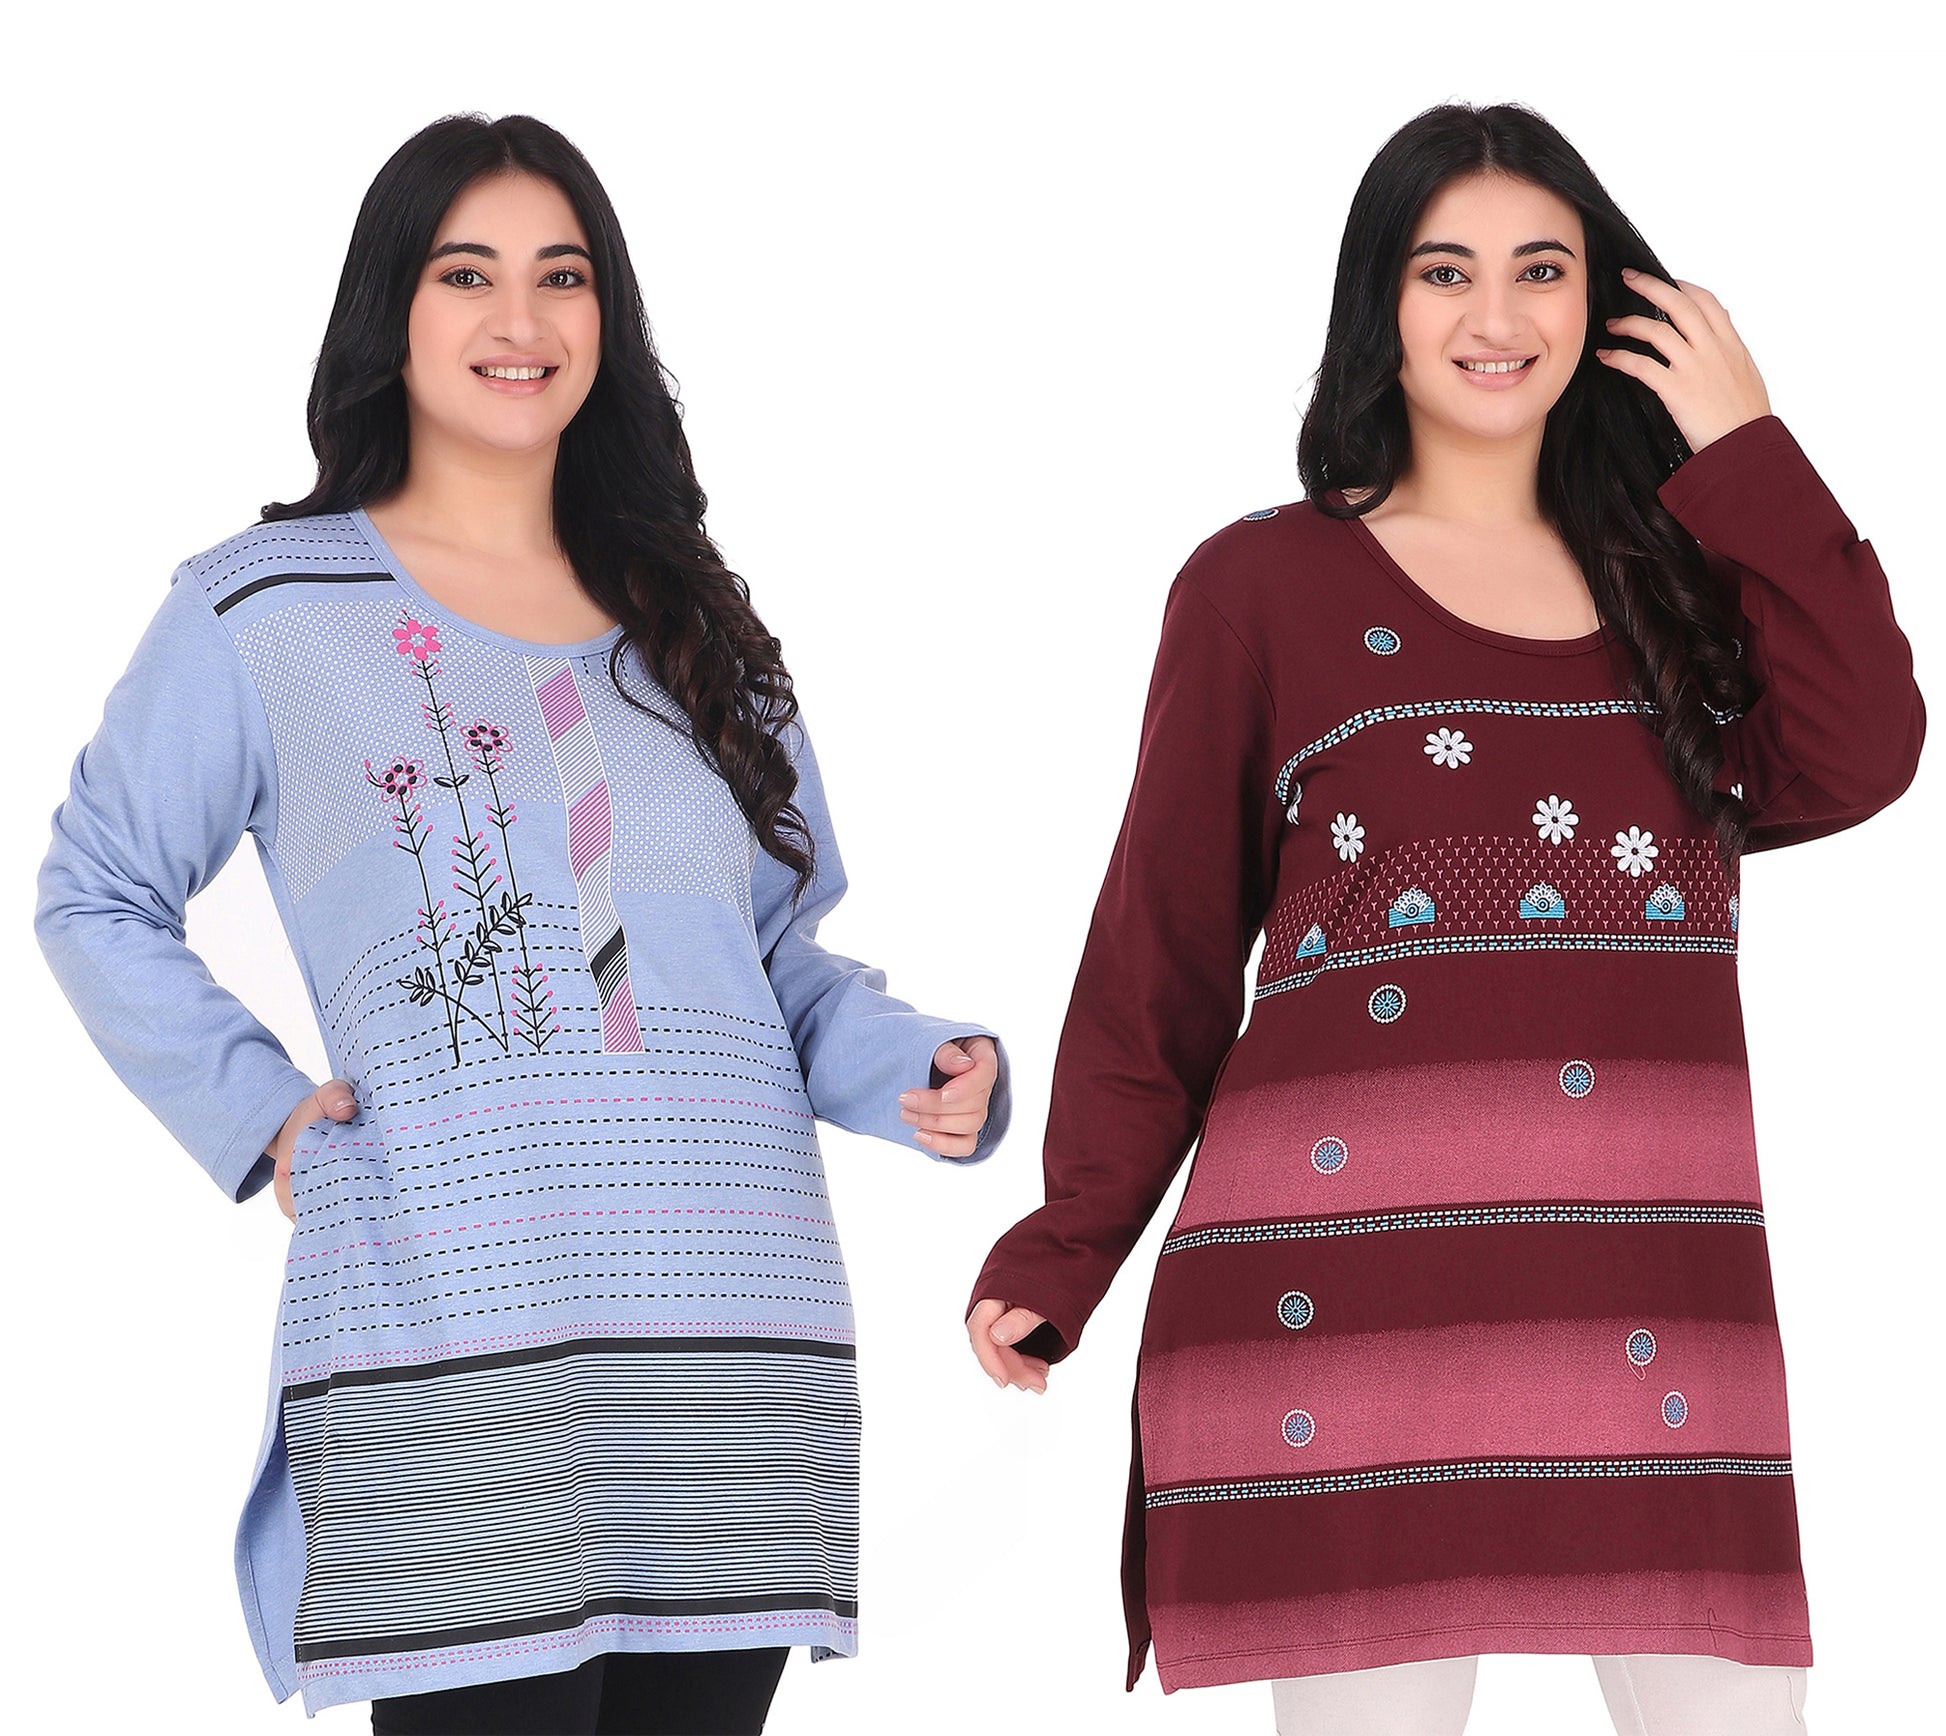 Plus Size Printed Long Tops For Women Full Sleeves - Pack of 2 (Wine & Sky Blue)